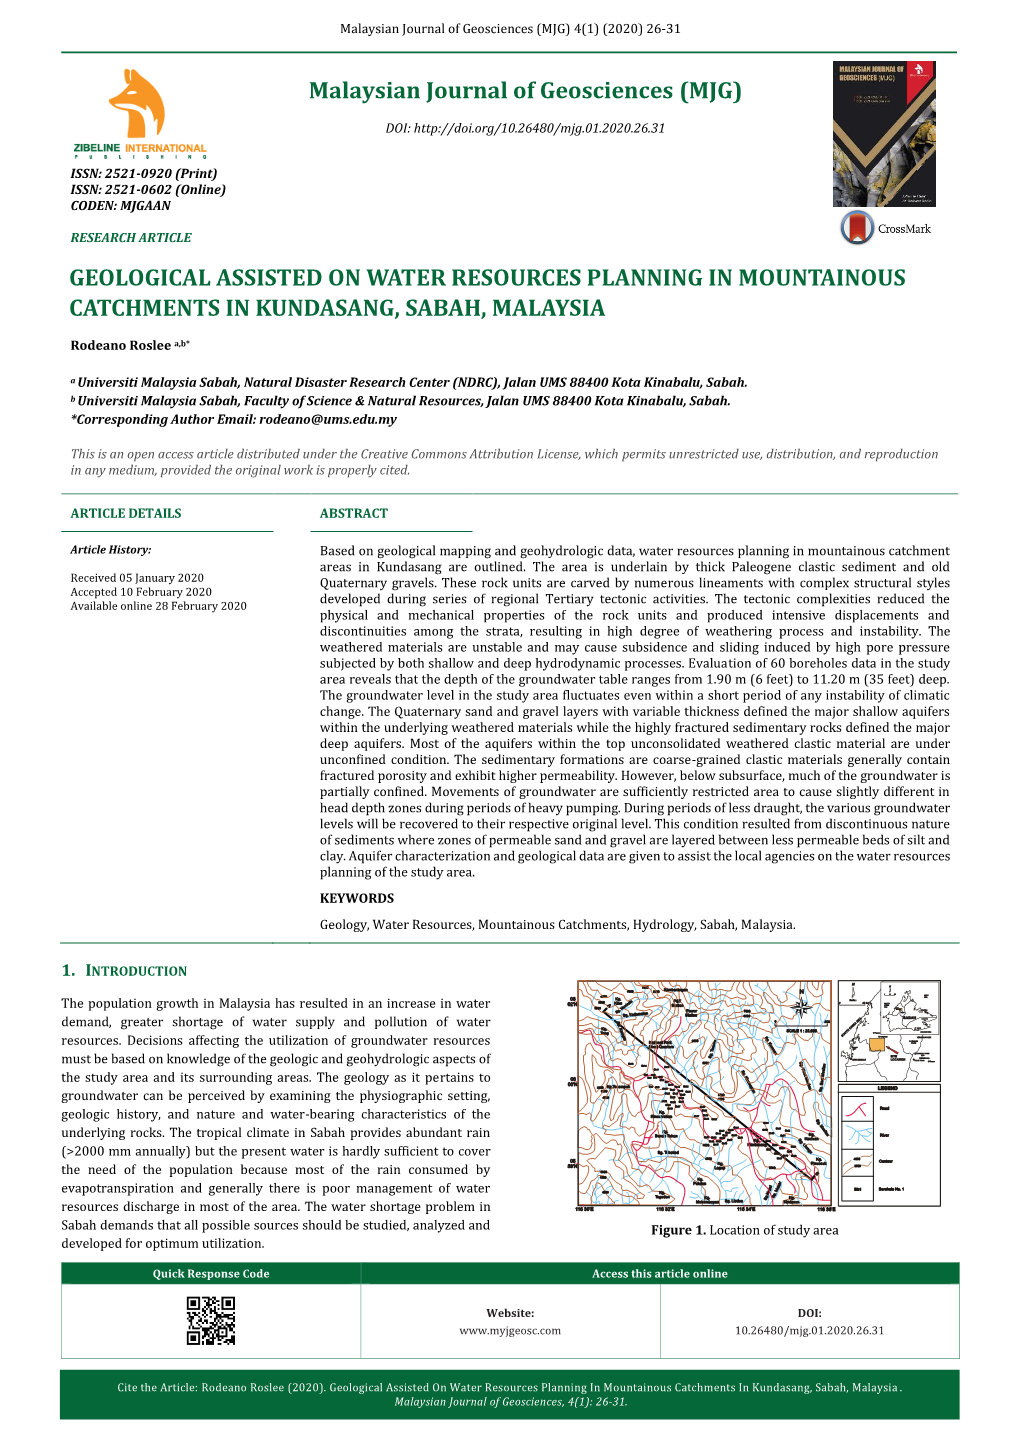 Geological Assisted on Water Resources Planning in Mountainous Catchments in Kundasang, Sabah, Malaysia